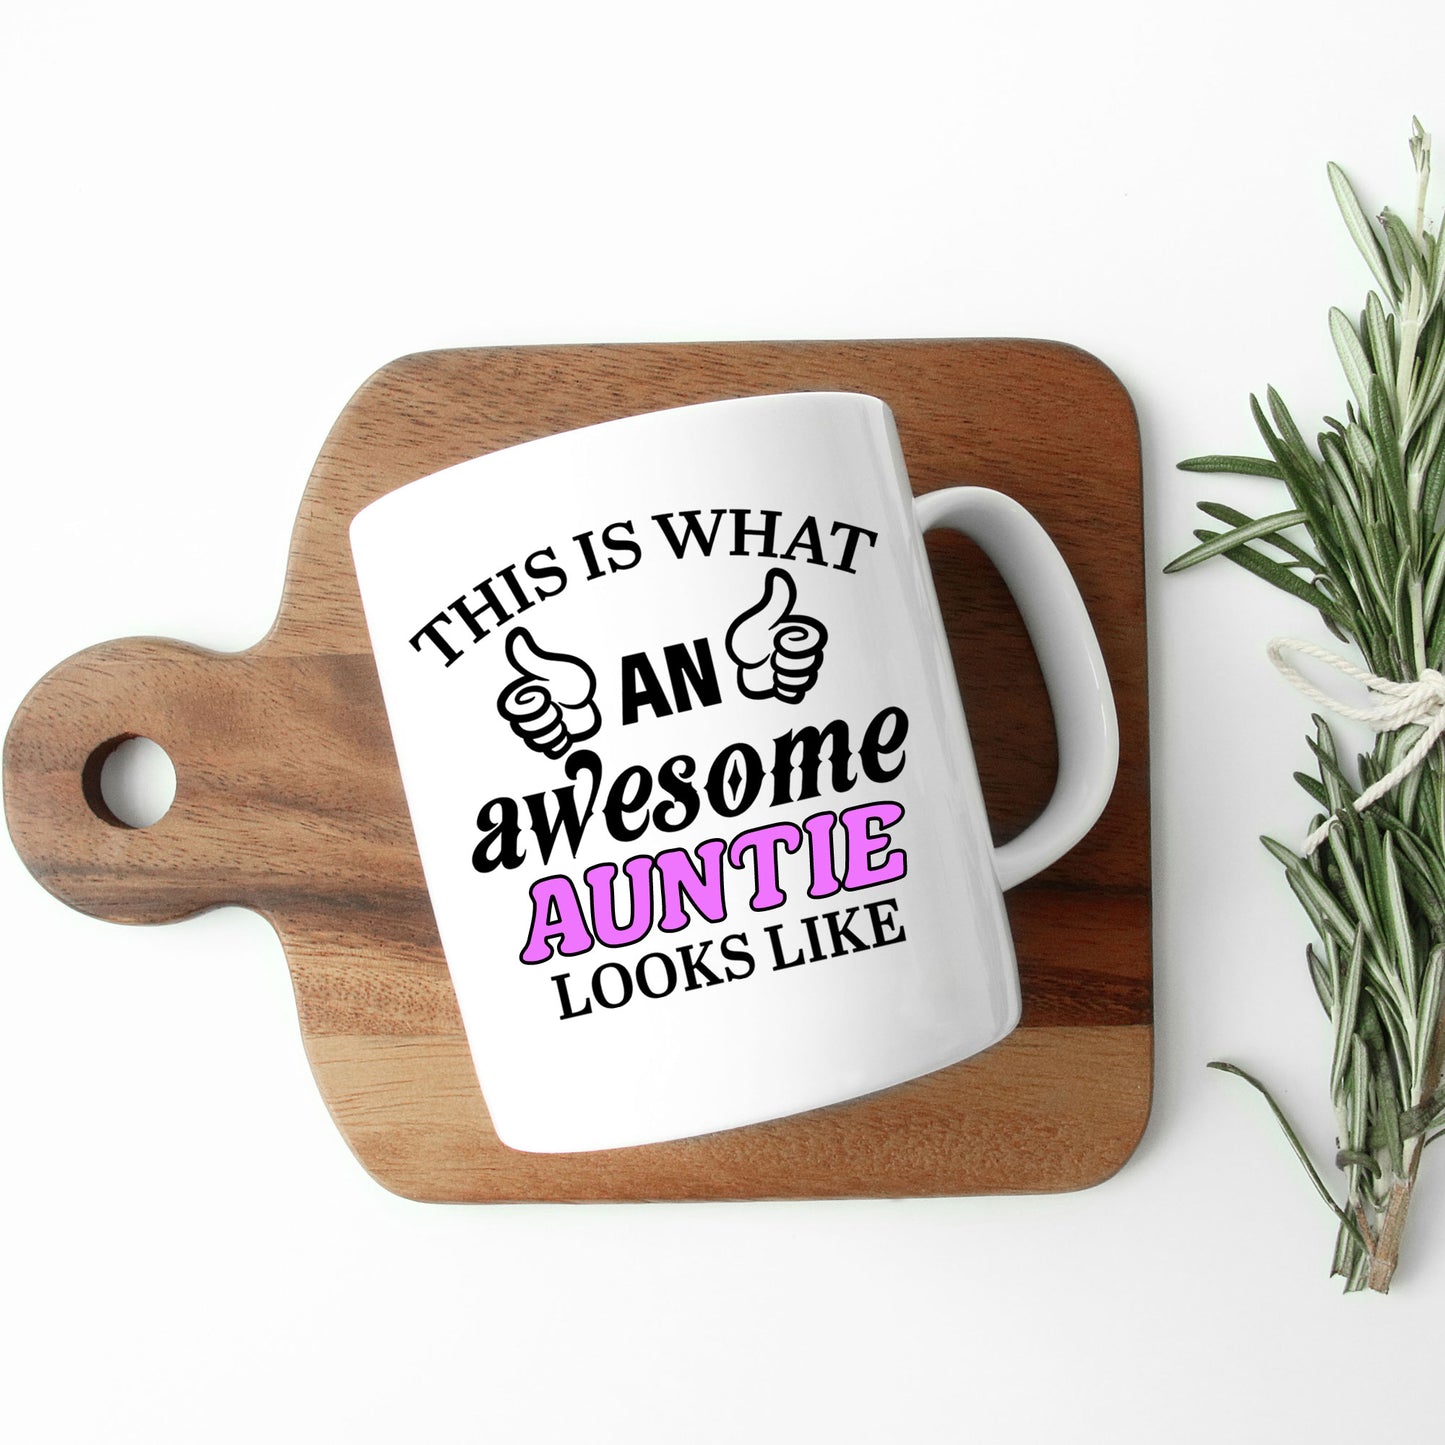 This Is What An Awesome Auntie Looks Like Mug  - Always Looking Good -   